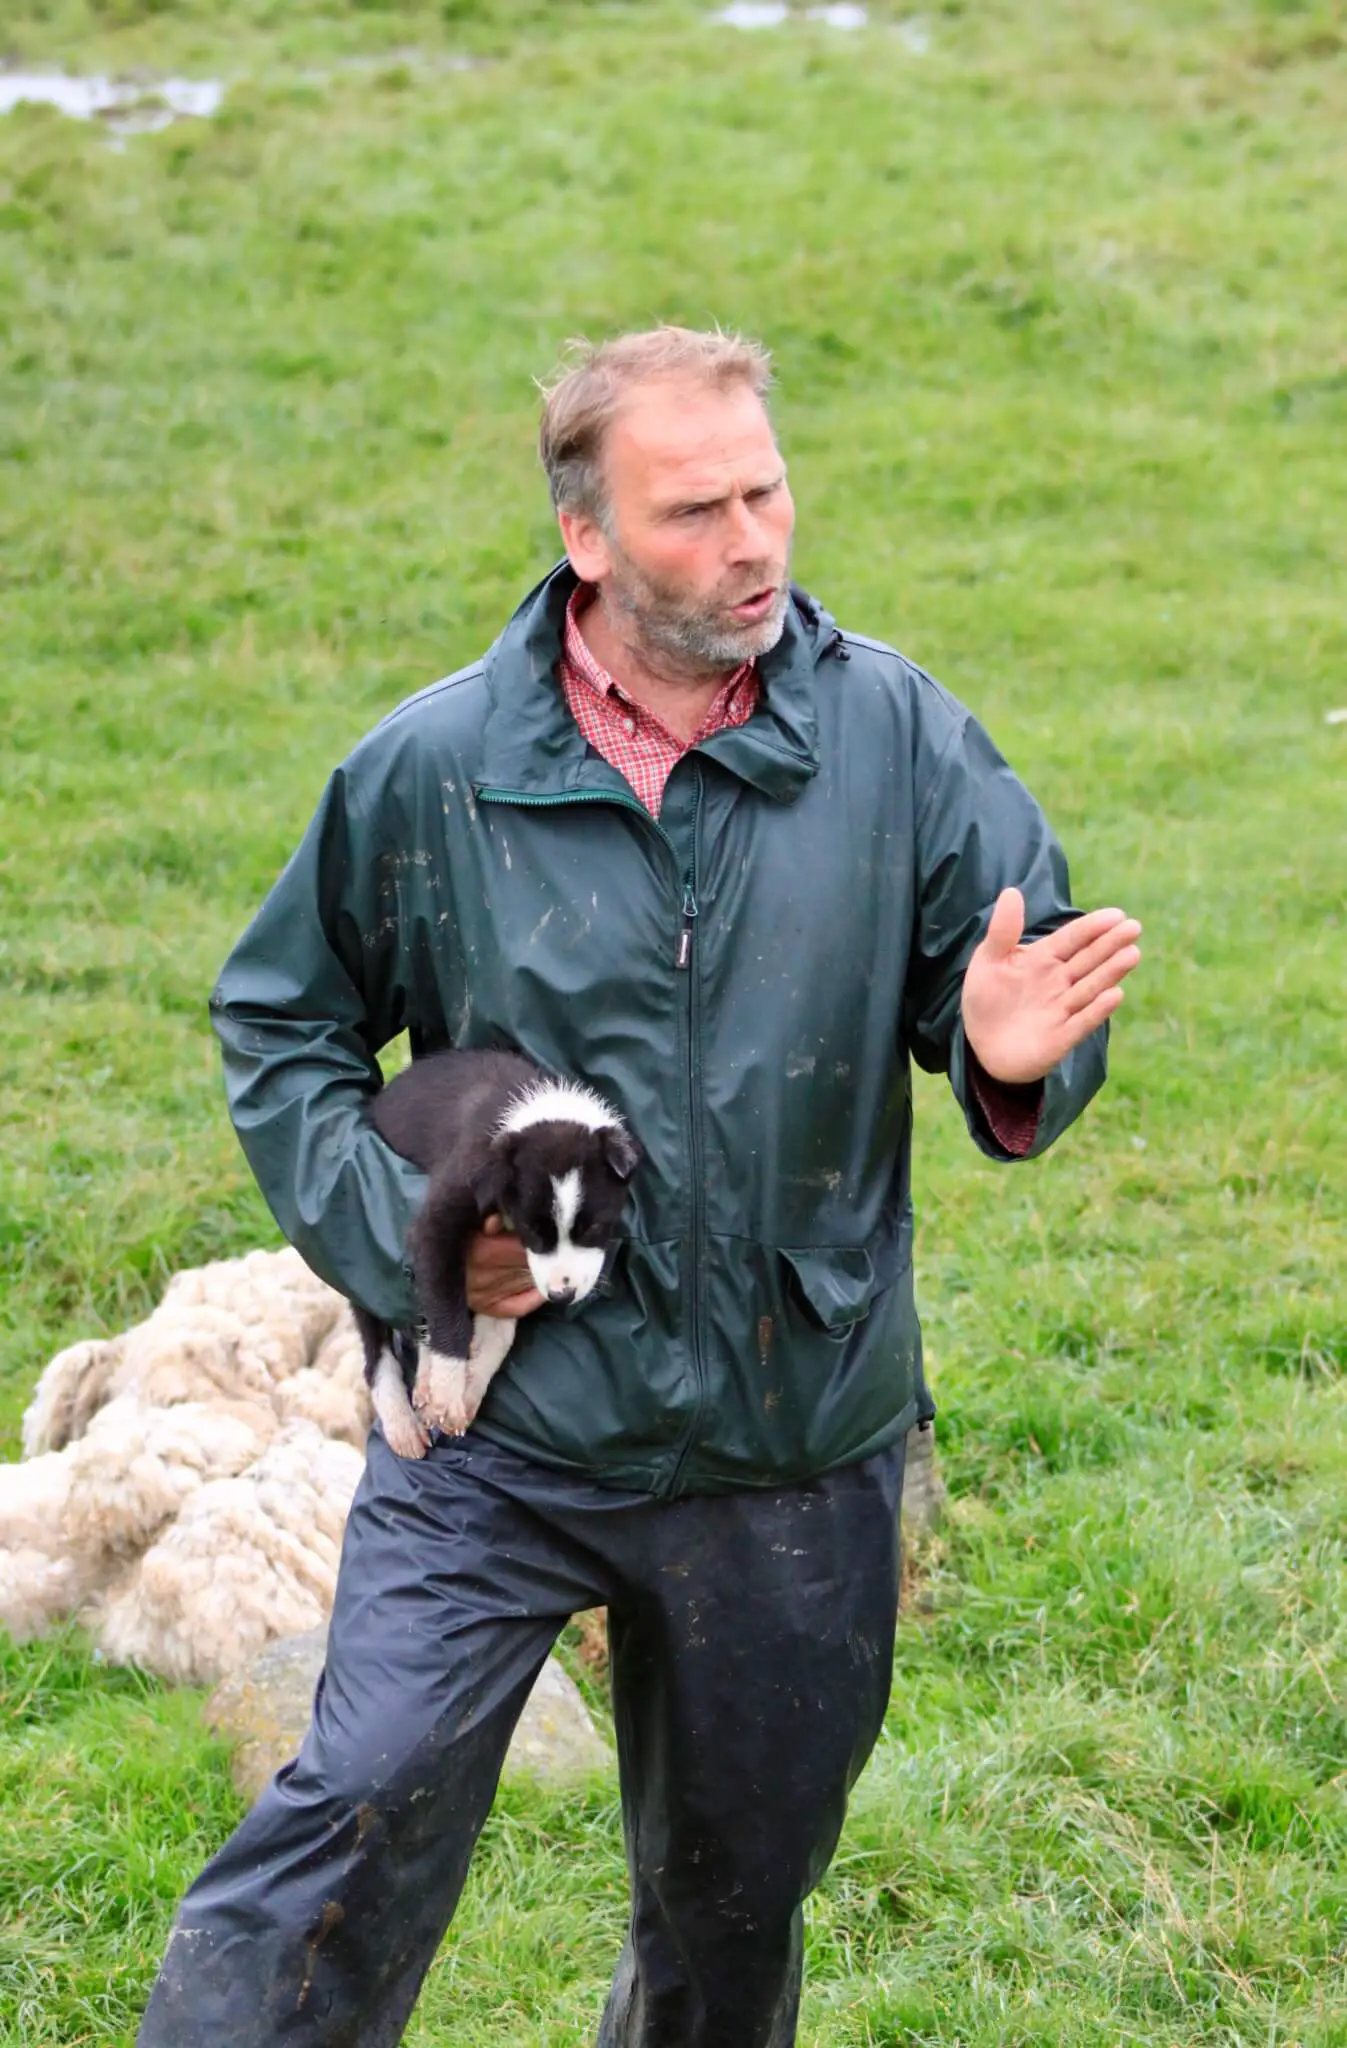 Neil explaining his craft while holding a puppy. Visiting a working sheepdog farm was one of the highlights of our one week in Scotland itinerary.